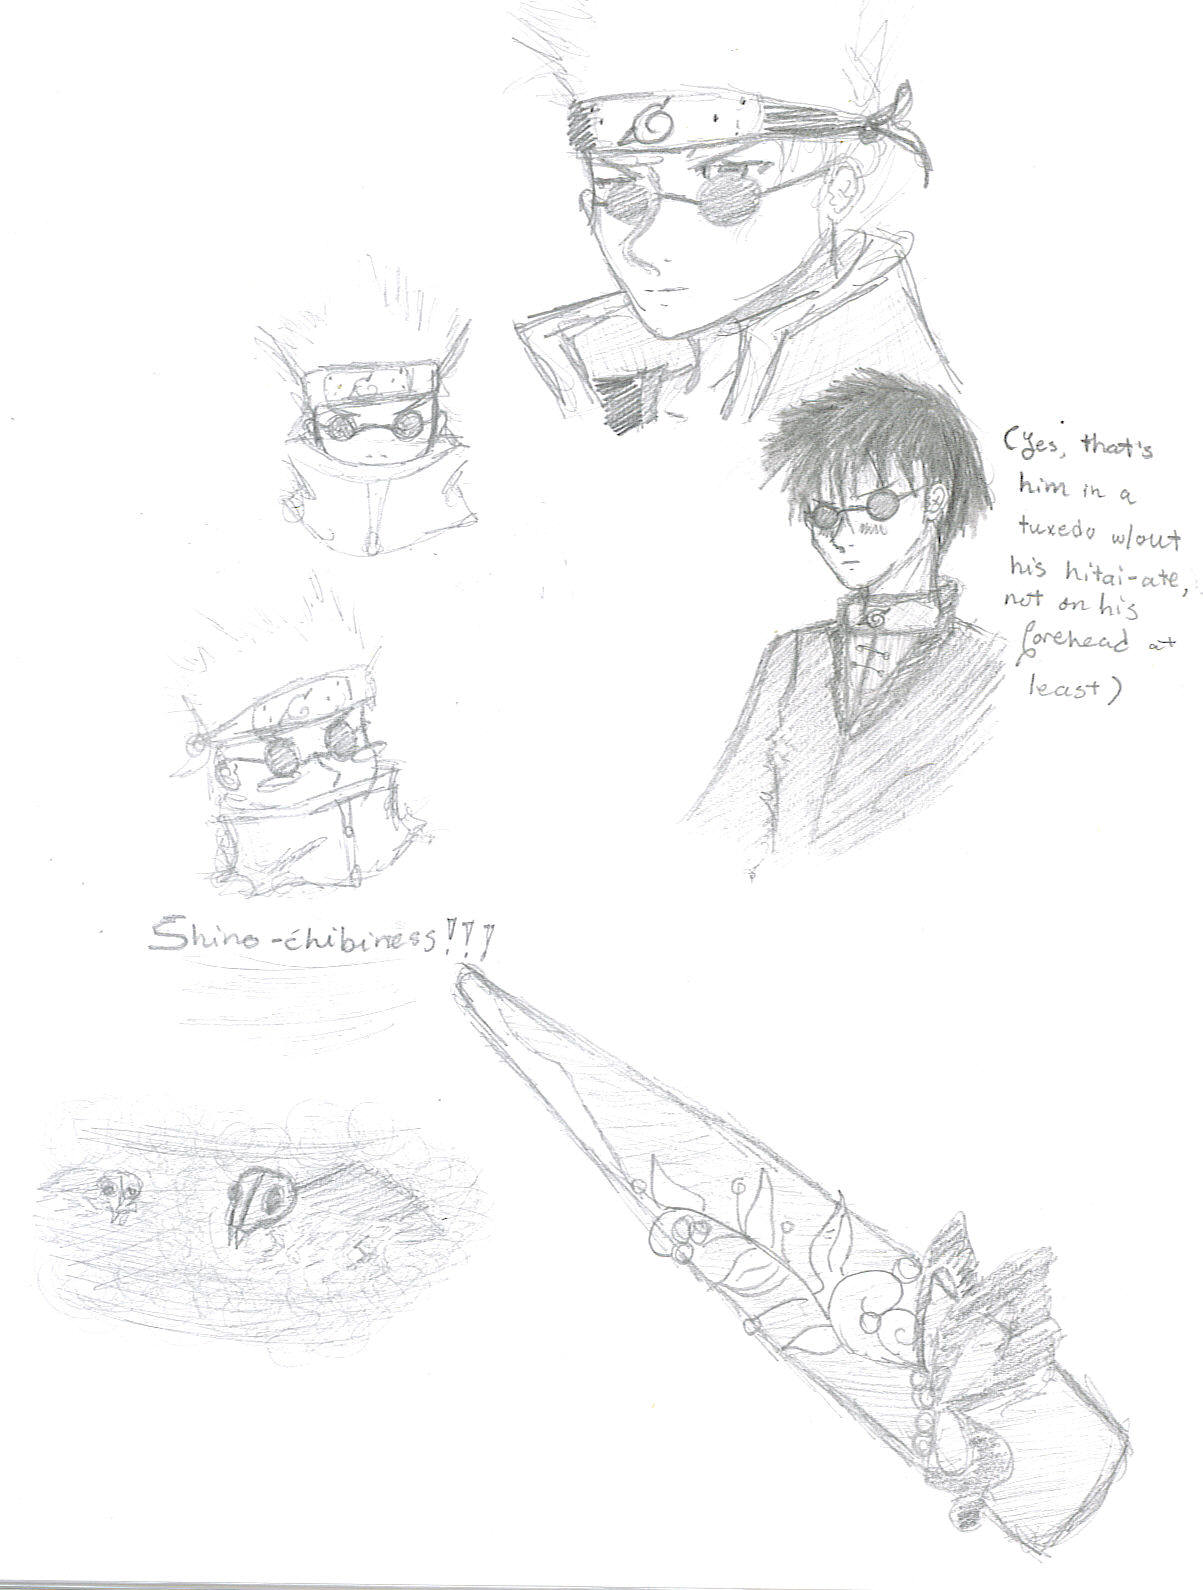 Shino Fanfic Sketches by RingLupine